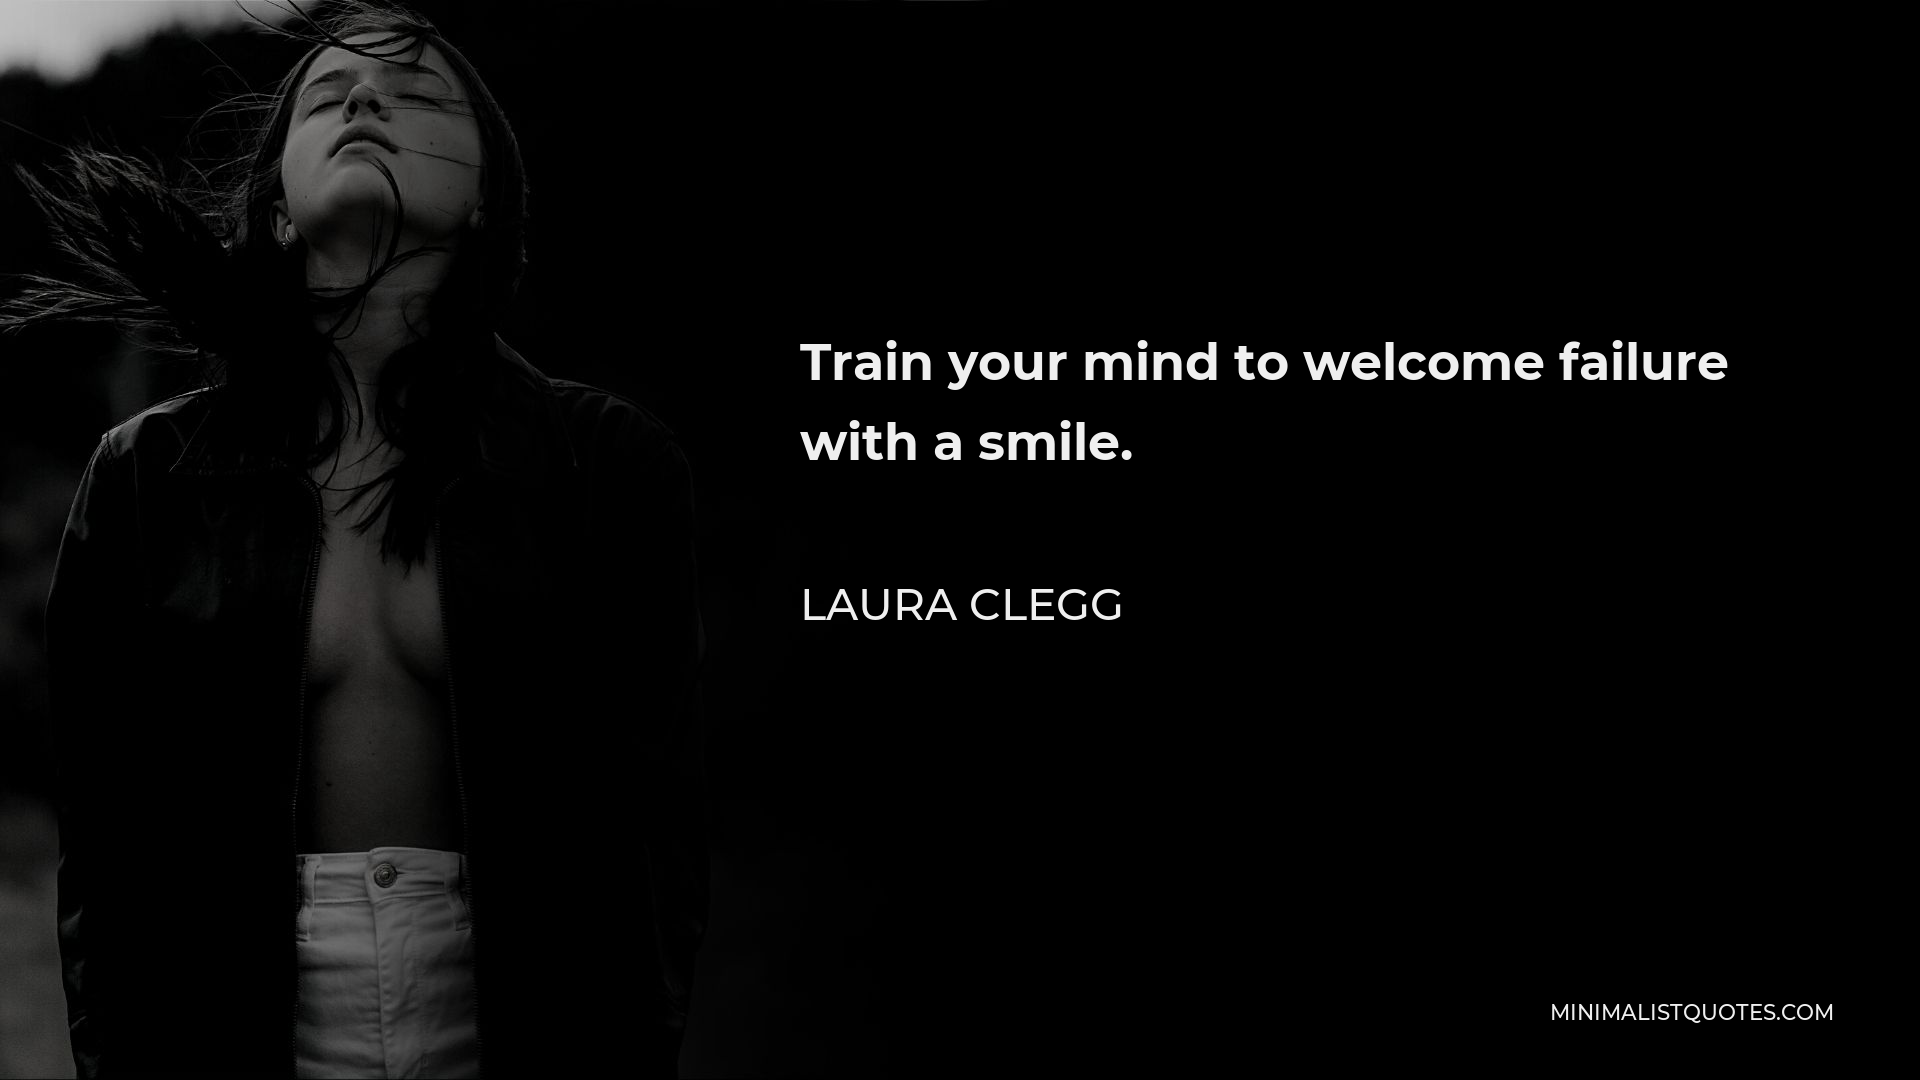 Laura Clegg Quote - Train your mind to welcome failure with a smile.